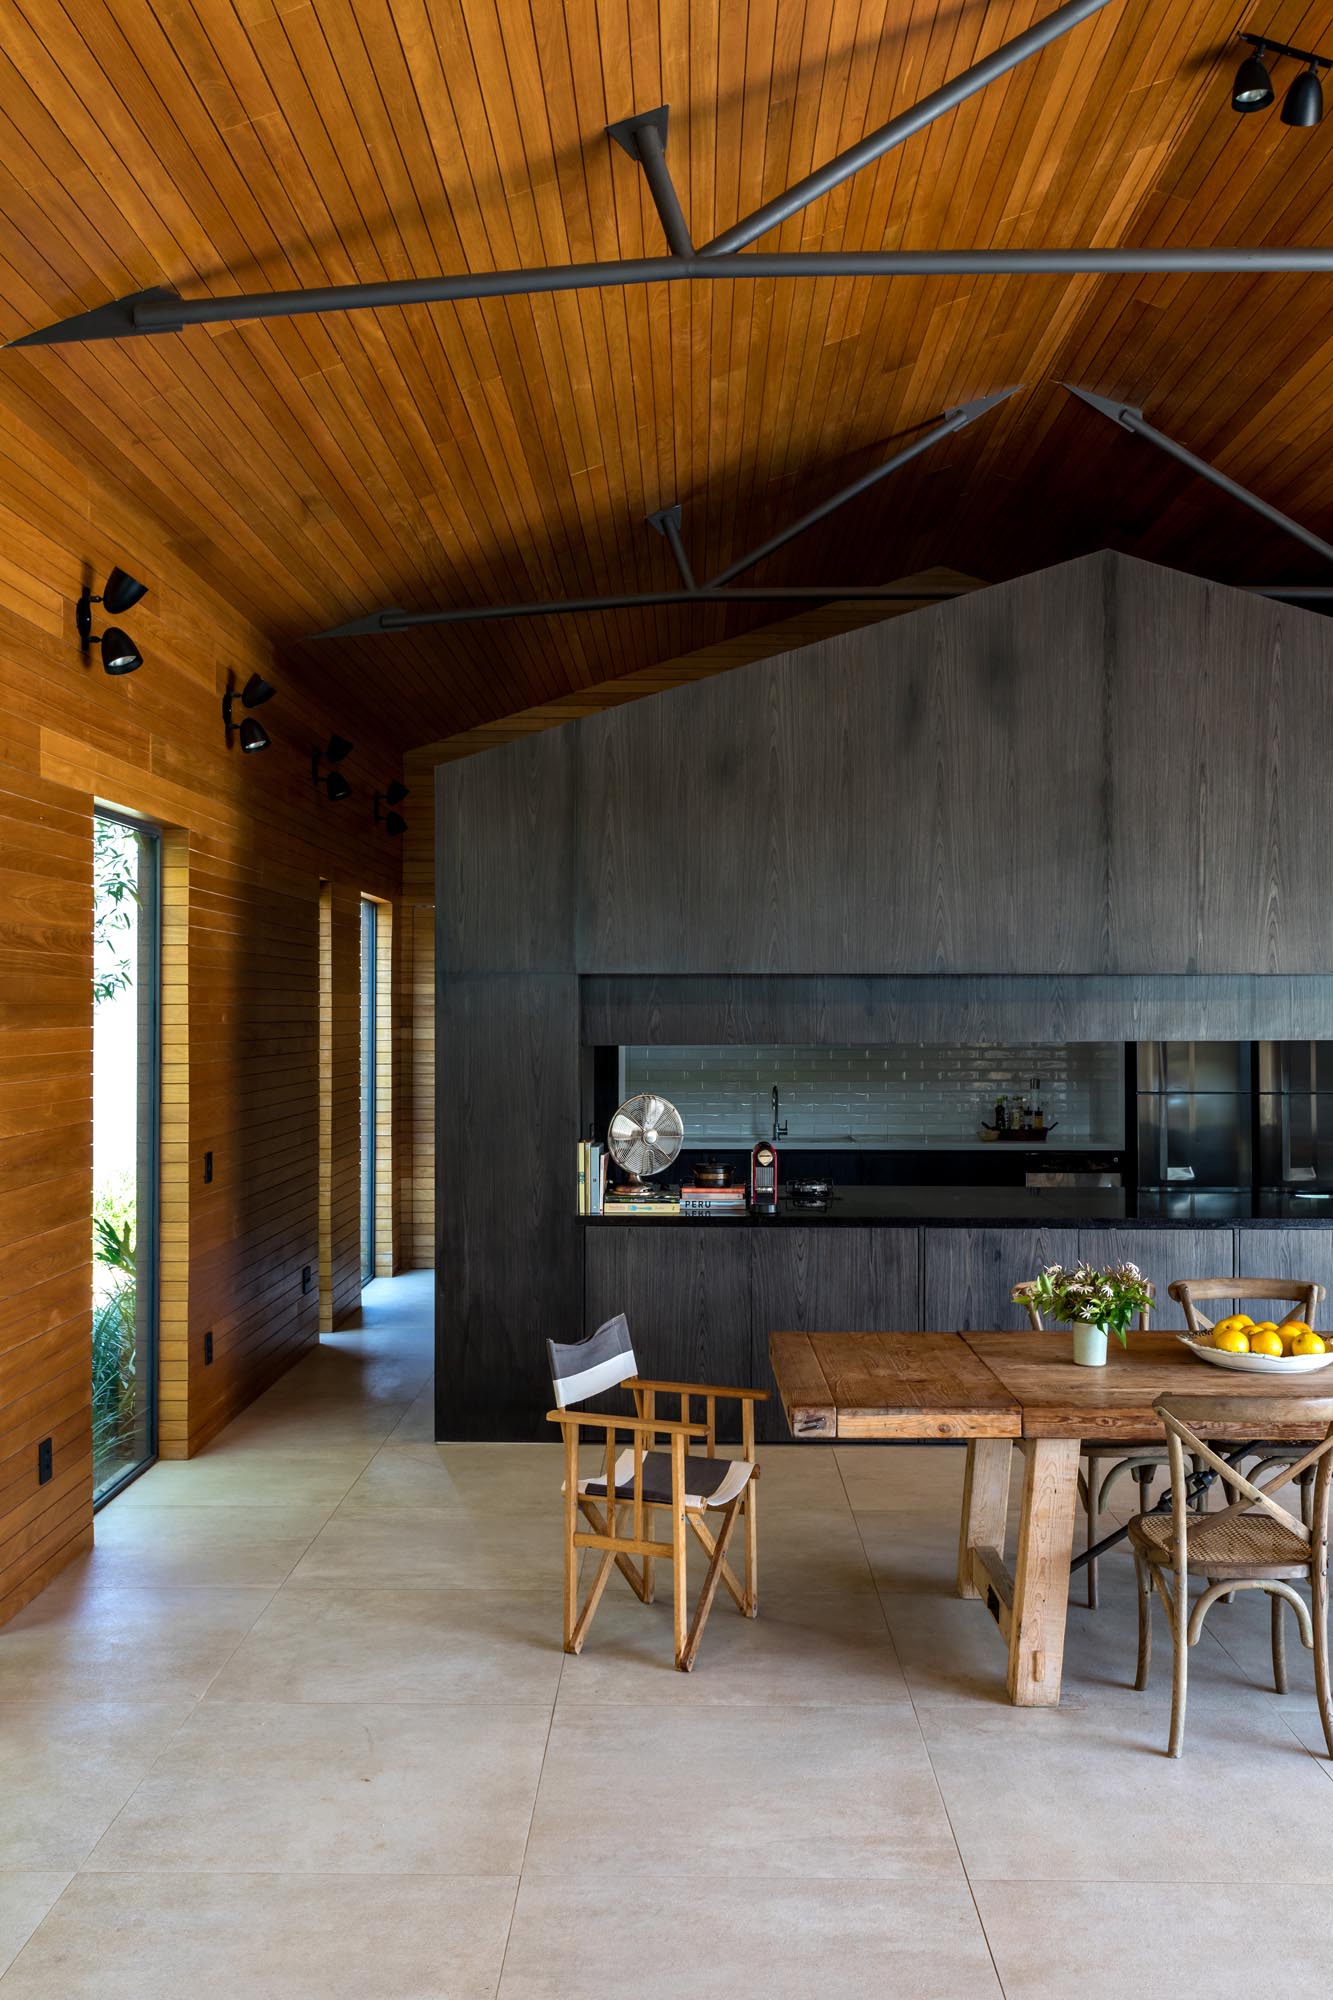 The interior of this modern home is lined in Tauari, a Brazilian pale wood, while the kitchen is completely made out of darkened wood. The kitchen can also be hidden from view, as a section of the cabinetry can be lowered down to close it off.